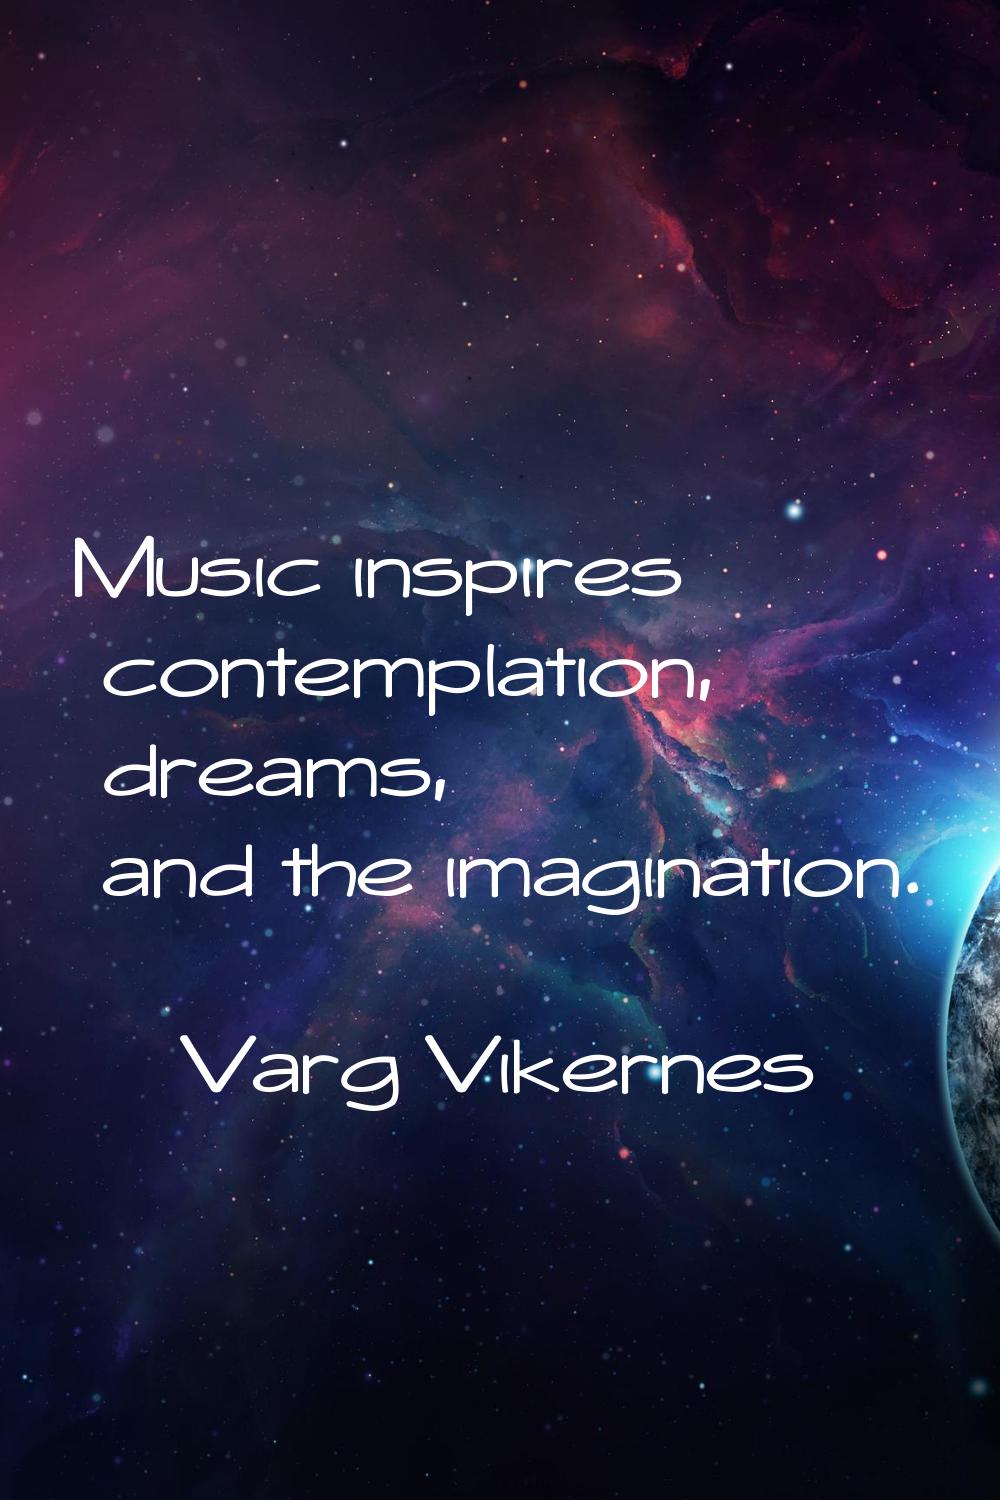 Music inspires contemplation, dreams, and the imagination.